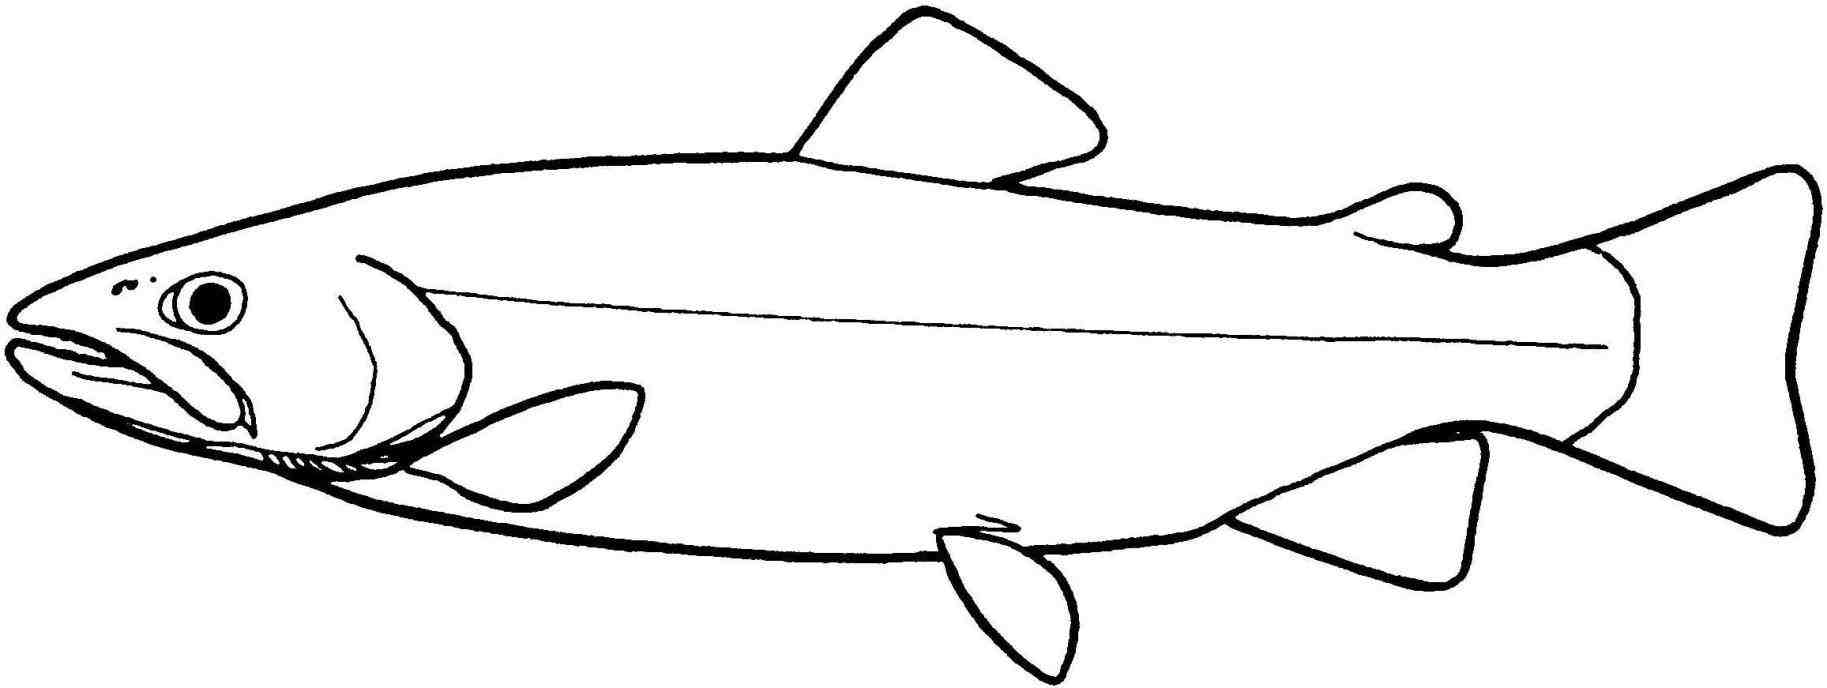 Simple Fish Drawing | Free download on ClipArtMag